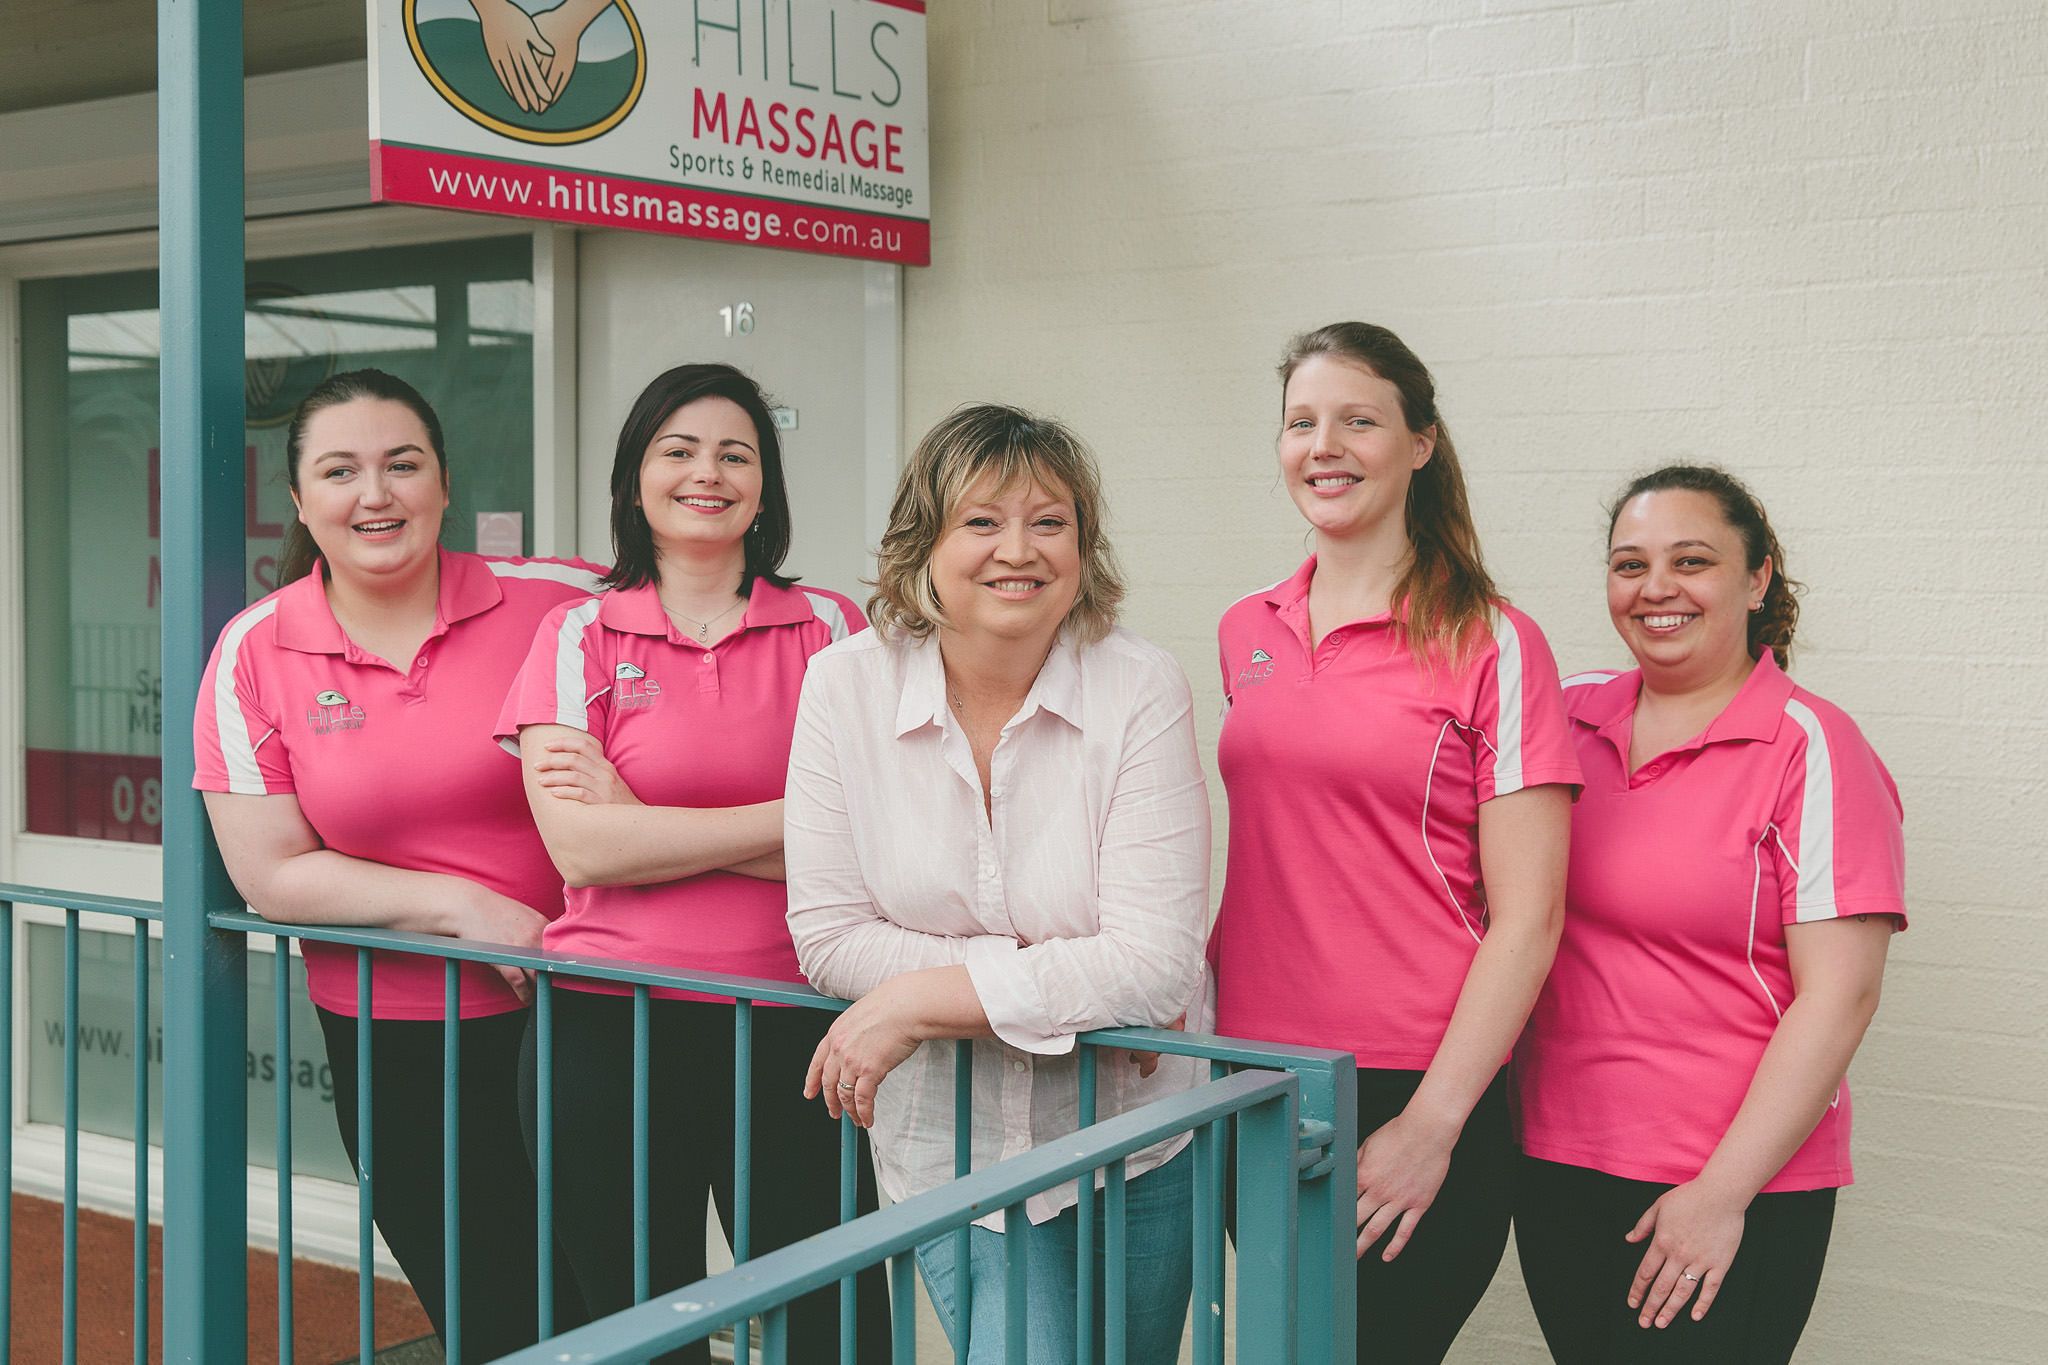 Hills massage team in front of business